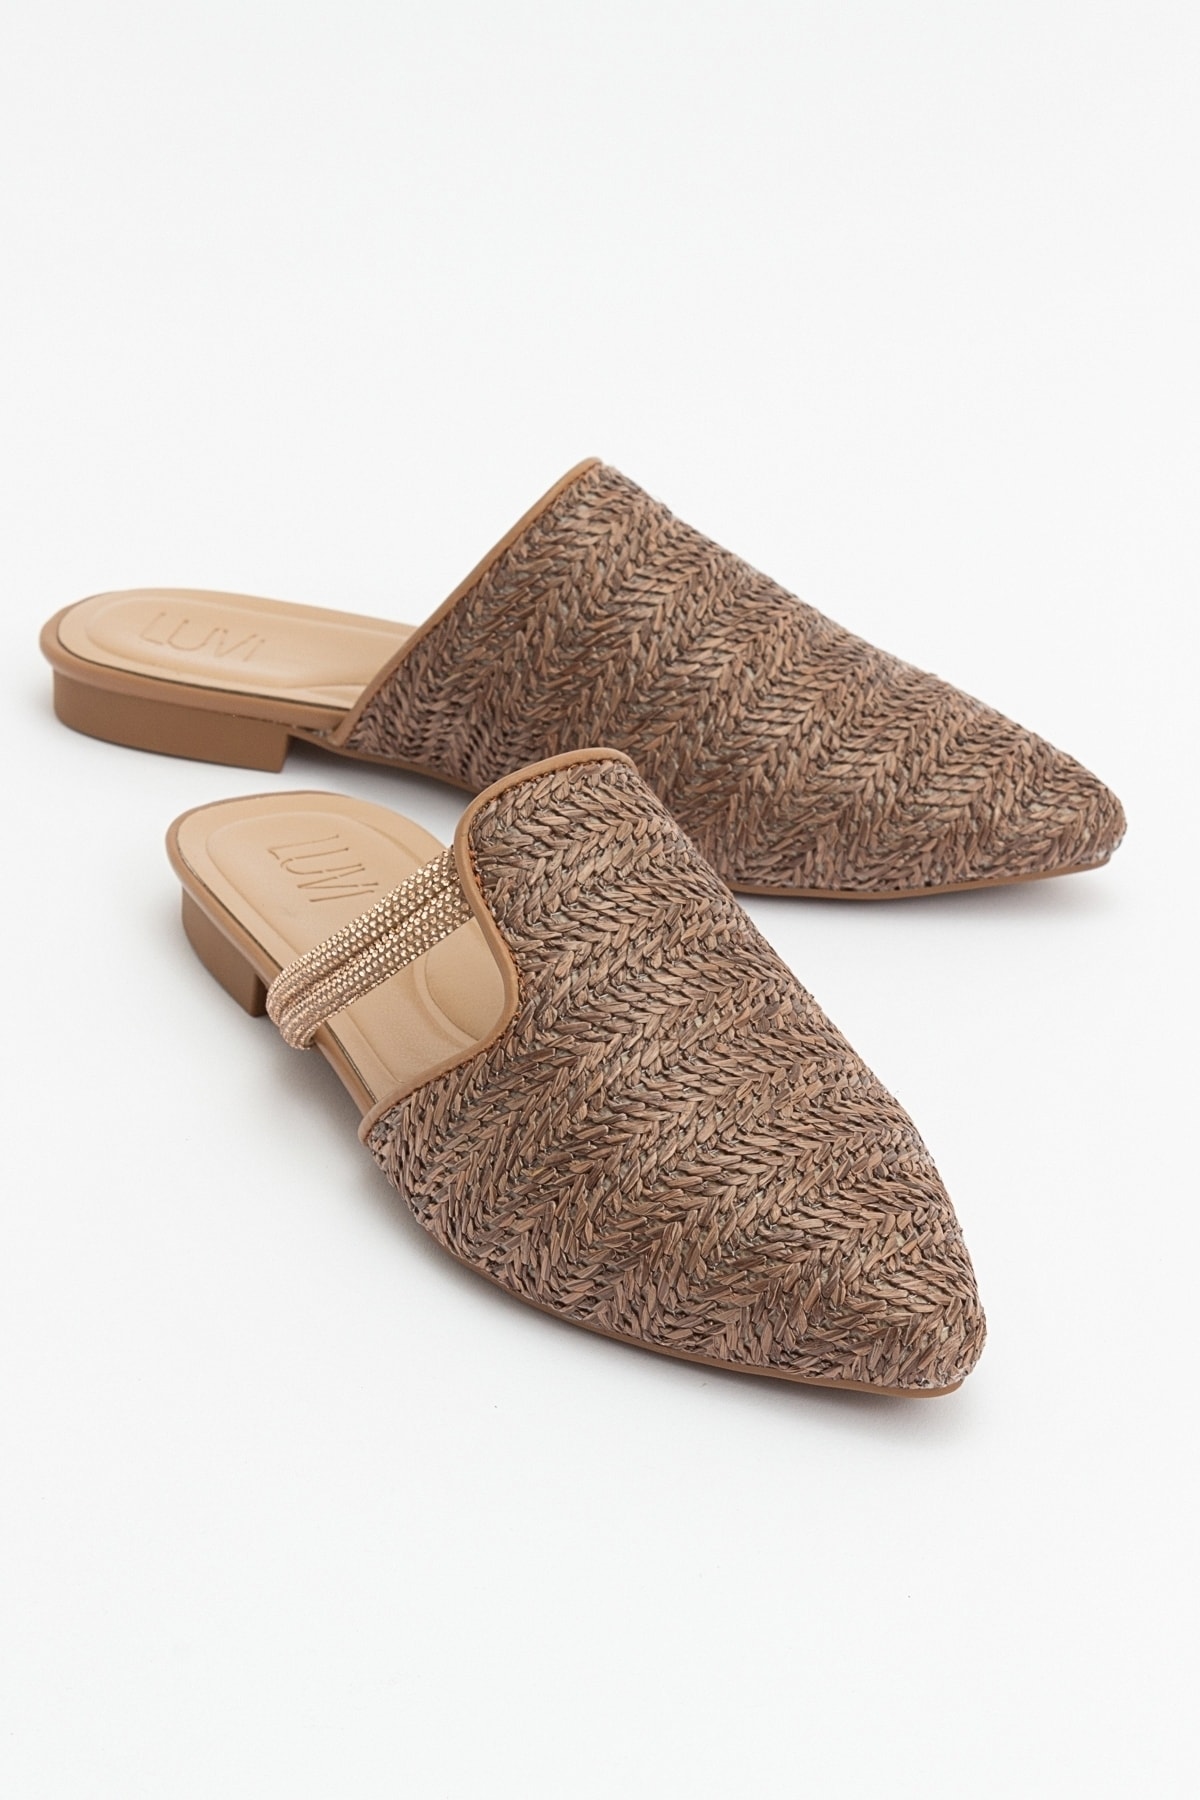 Levně LuviShoes PESA Brown Women's Slippers with Straw Stones